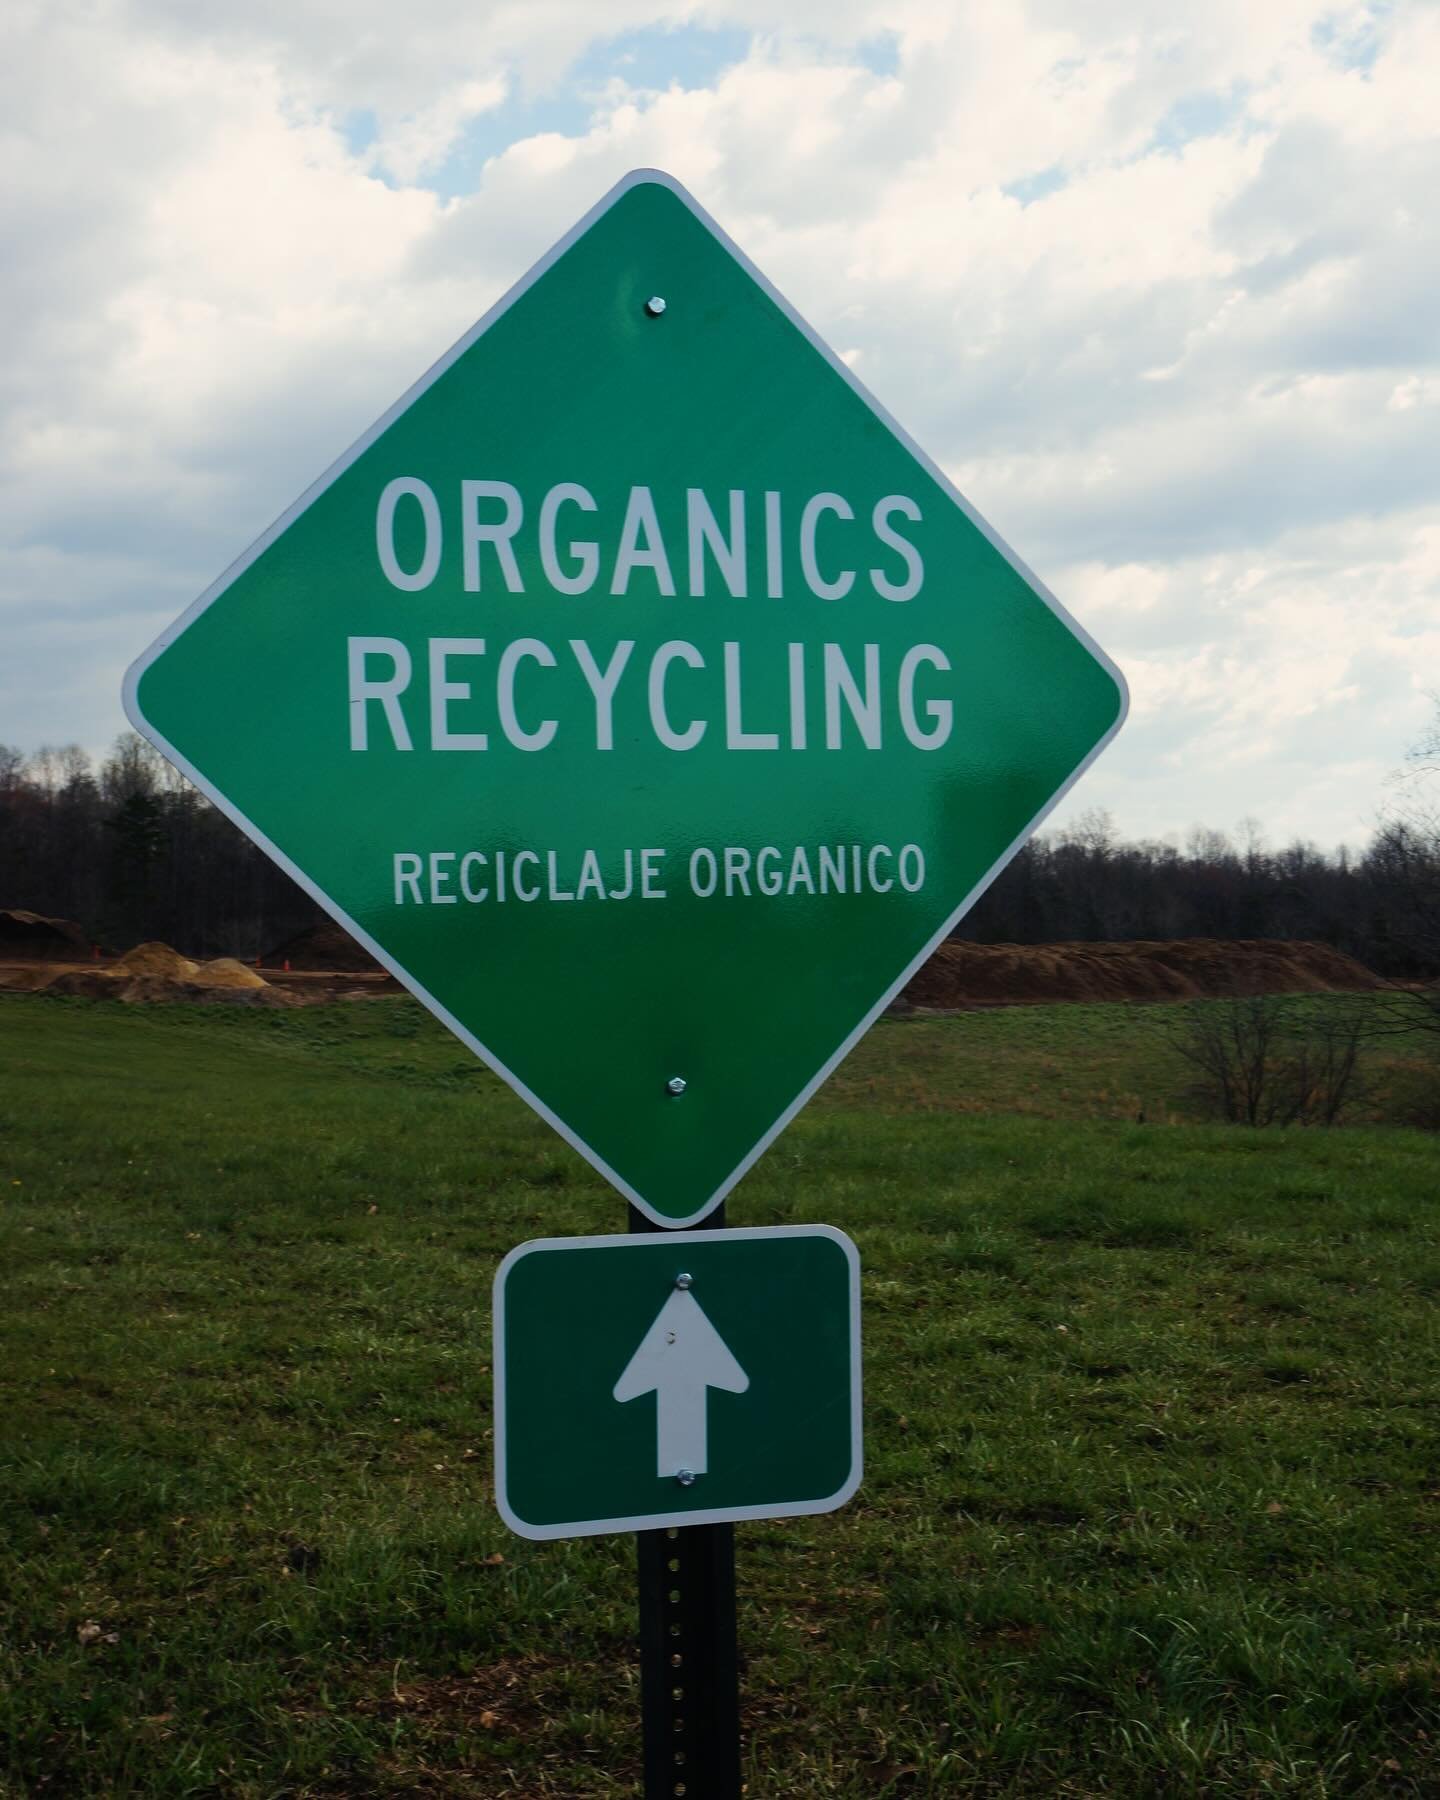 We put the CYCLE in RECYCLE! Bring us your yard waste and brush, we process it into high quality composts and mulches and then return it to the local area from whence it came. Keeping local carbon in the local ground; that&rsquo;s what we&rsquo;re ab